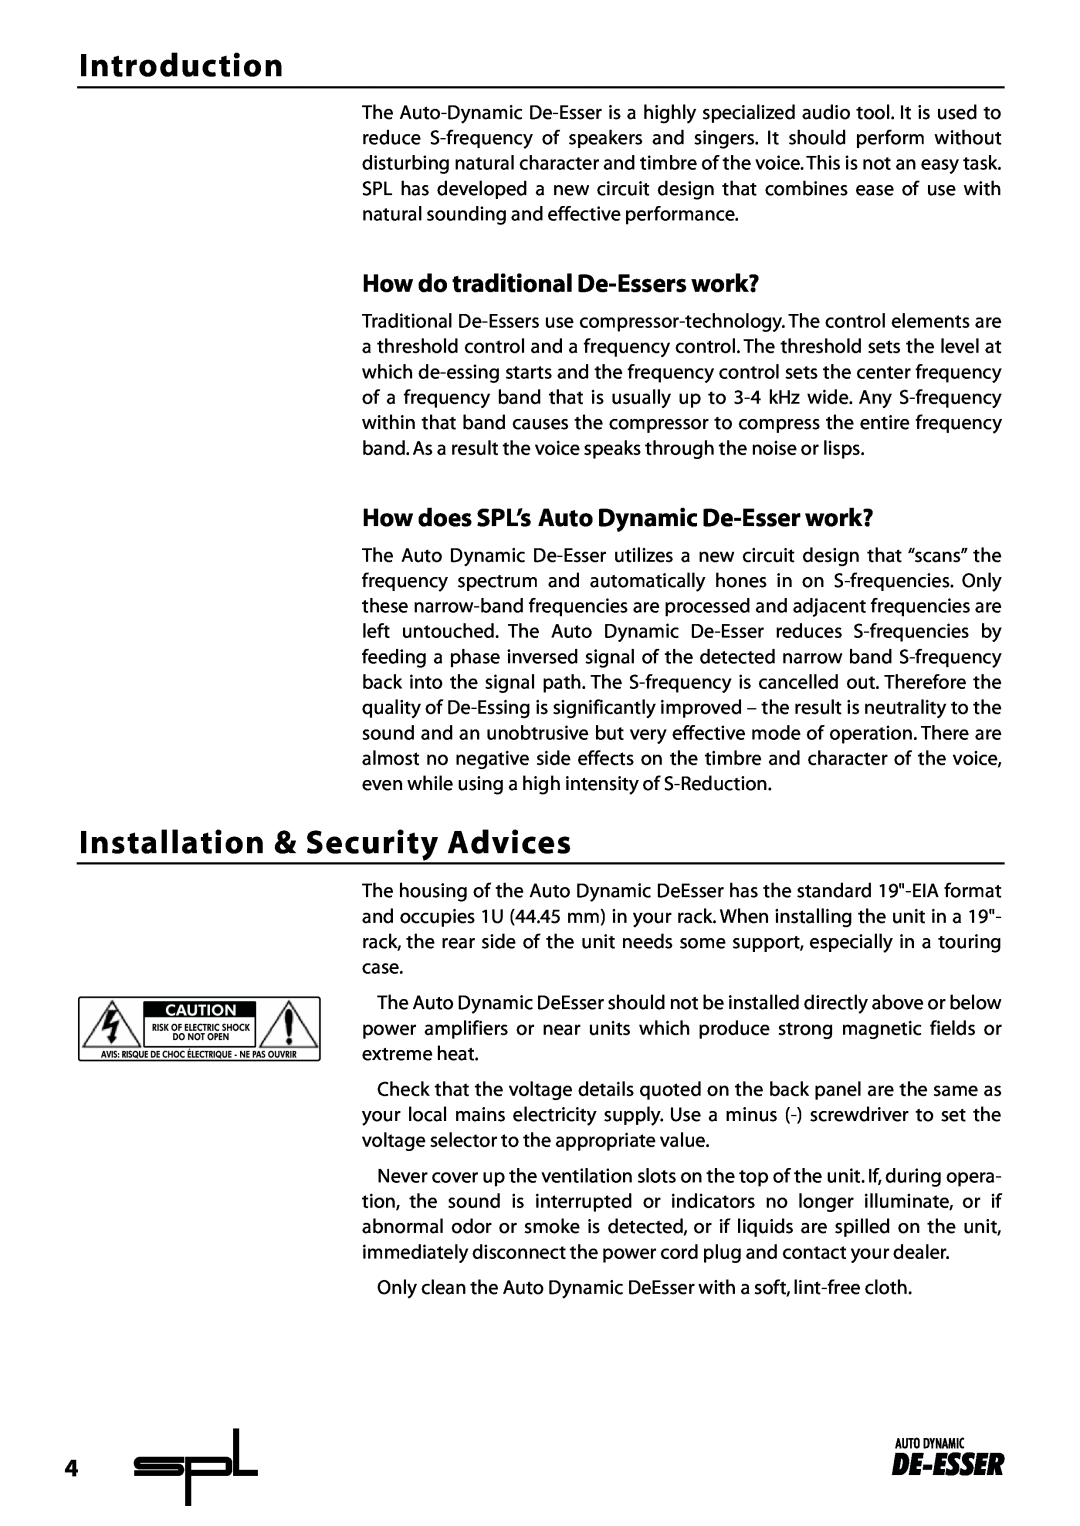 Sound Performance Lab 9629 manual Introduction, Installation & Security Advices, How do traditional De-Esserswork? 